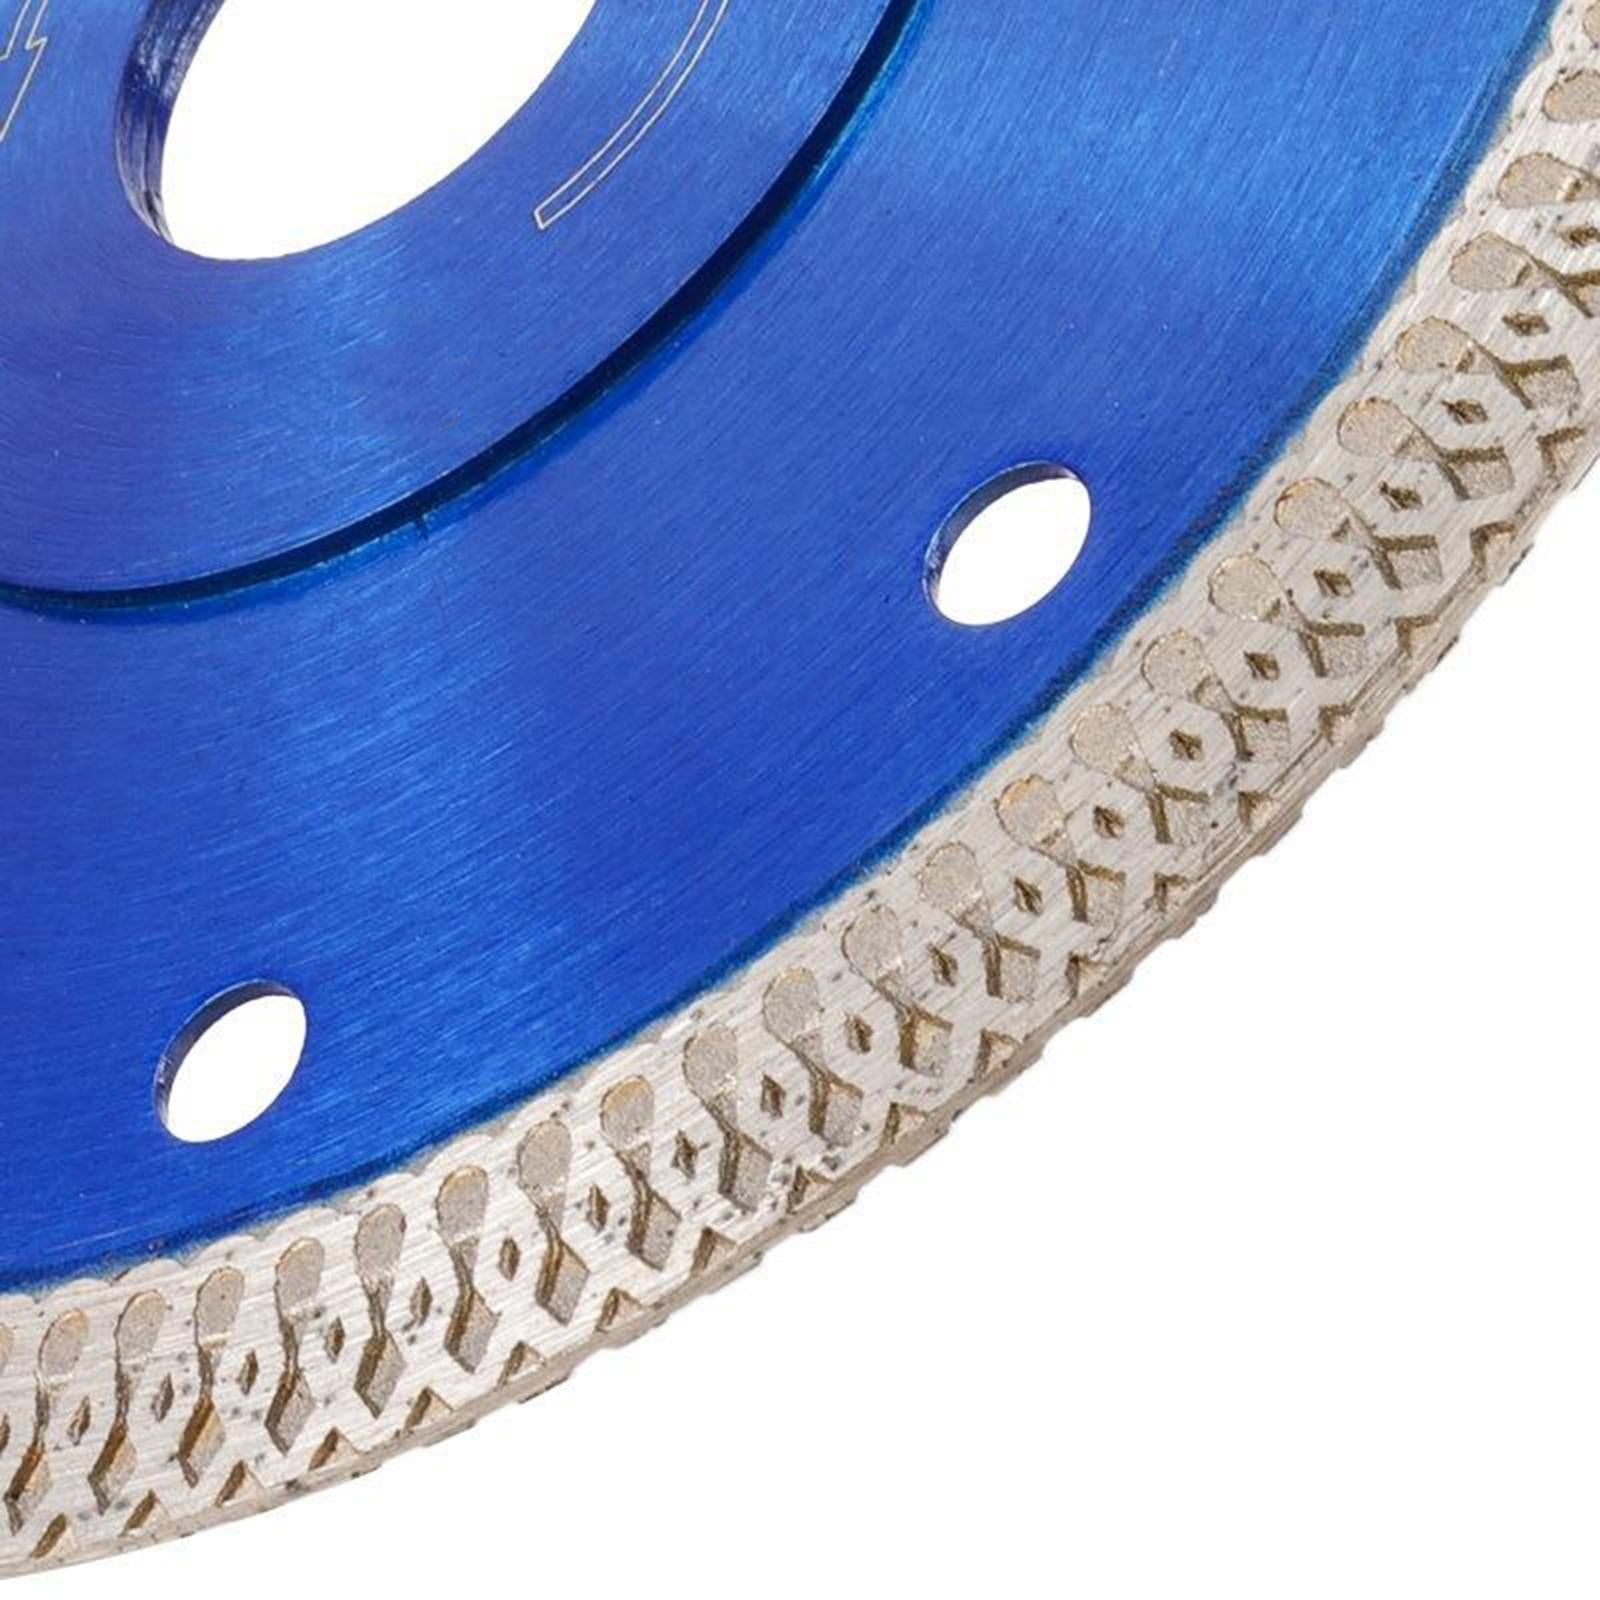 Angle Grinder Diamond Saw Blade Multitool Wood Carving Disc Cutting 4 Inch